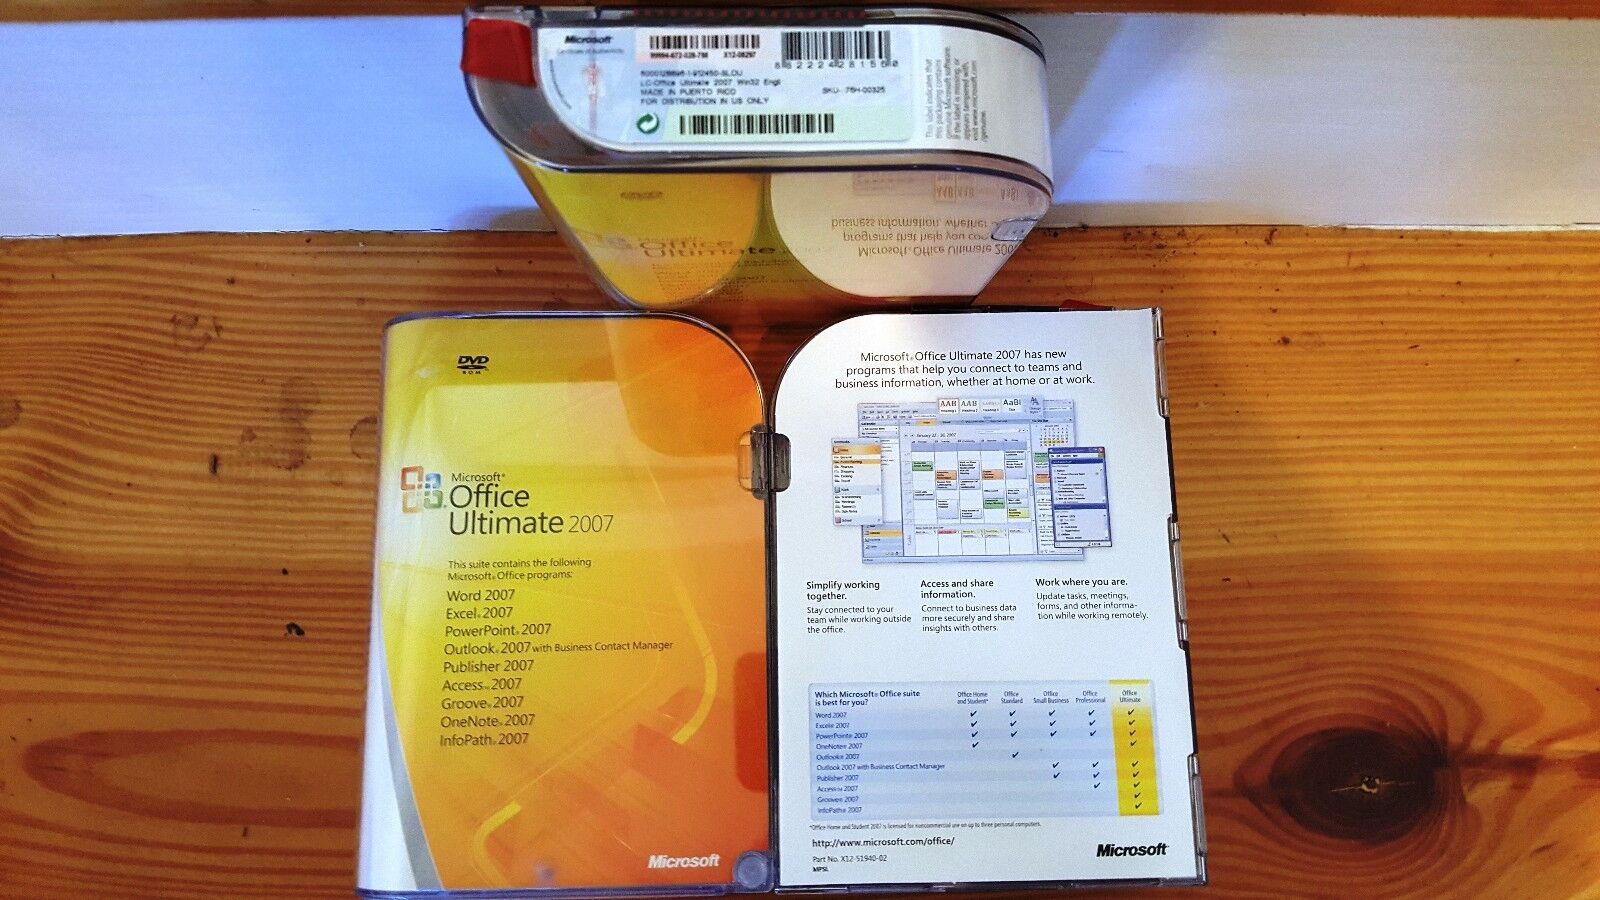 Microsoft Office 2007 Ultimate,SKU 76H-00325,Sealed Retail Box,Word,Excel,Access